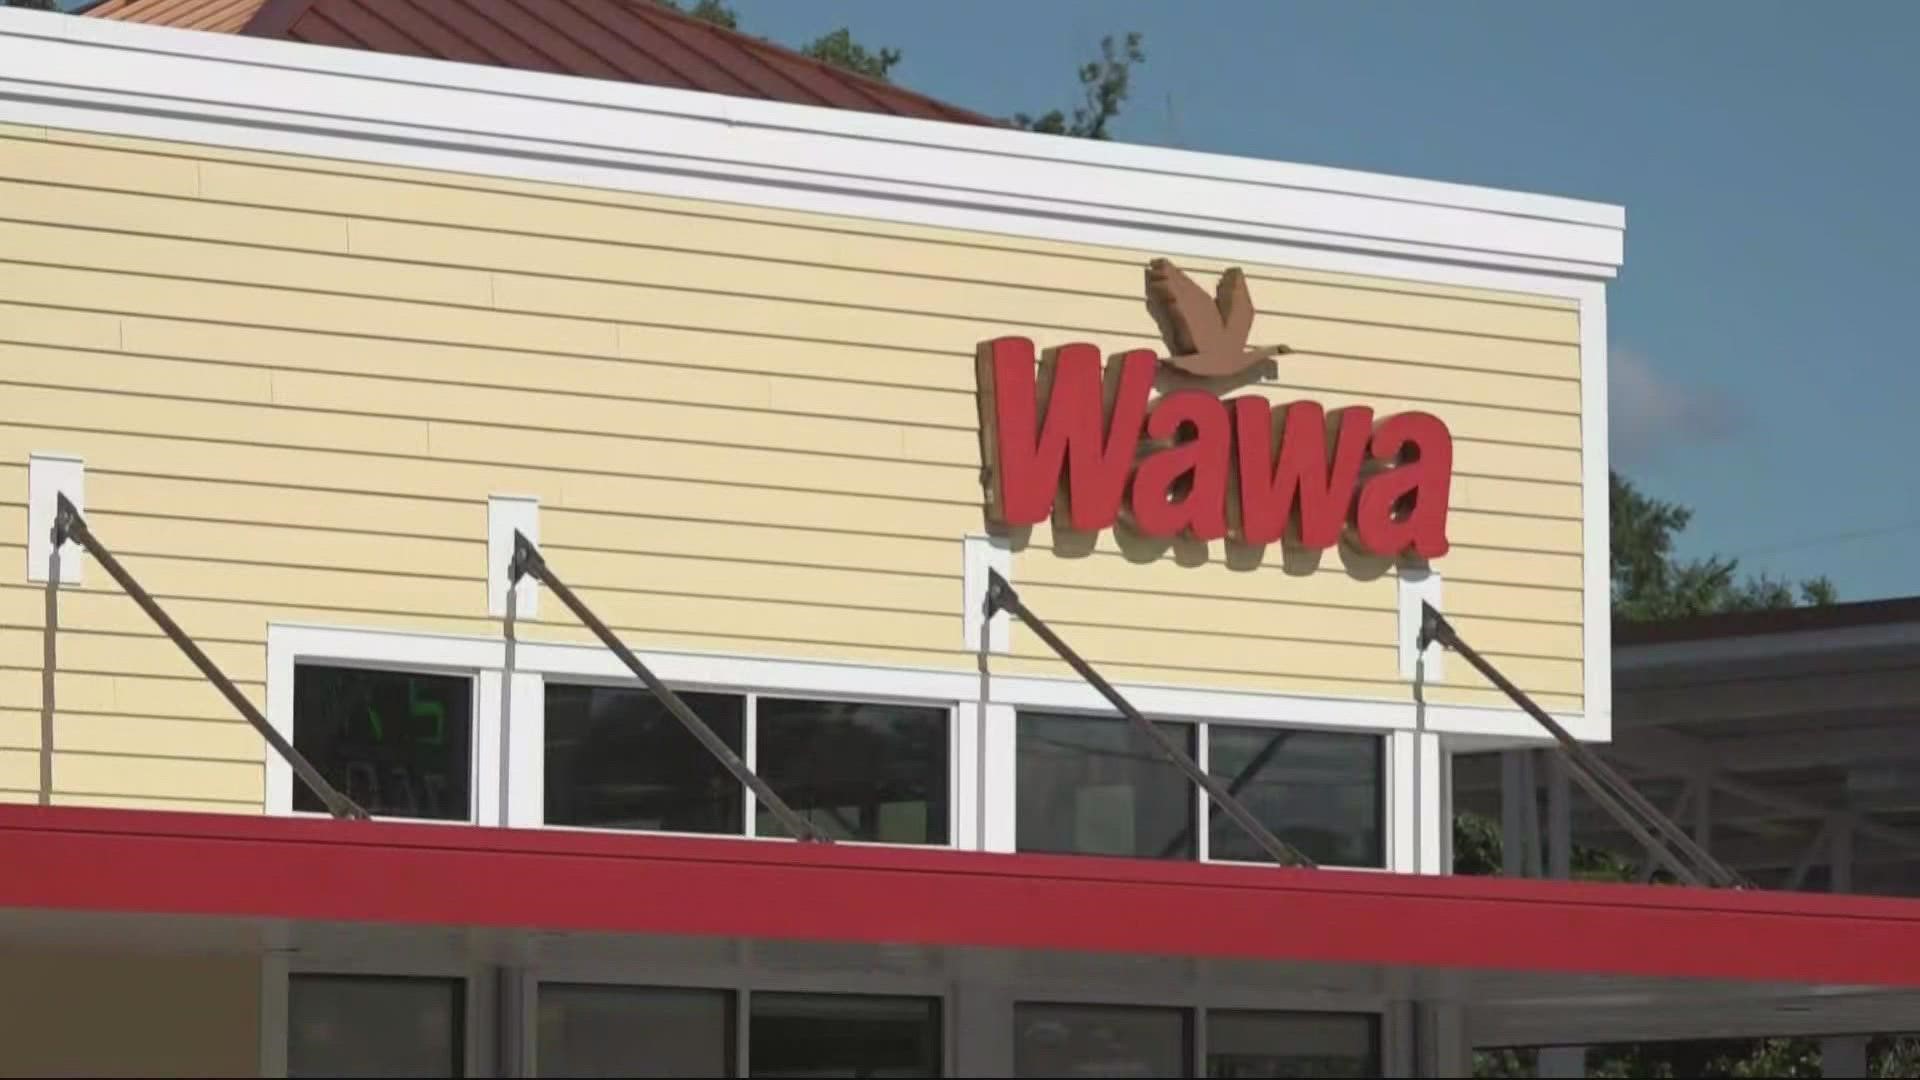 The new Wawa, located off Spring Park Road, is set to open its doors at 8 a.m. Thursday.